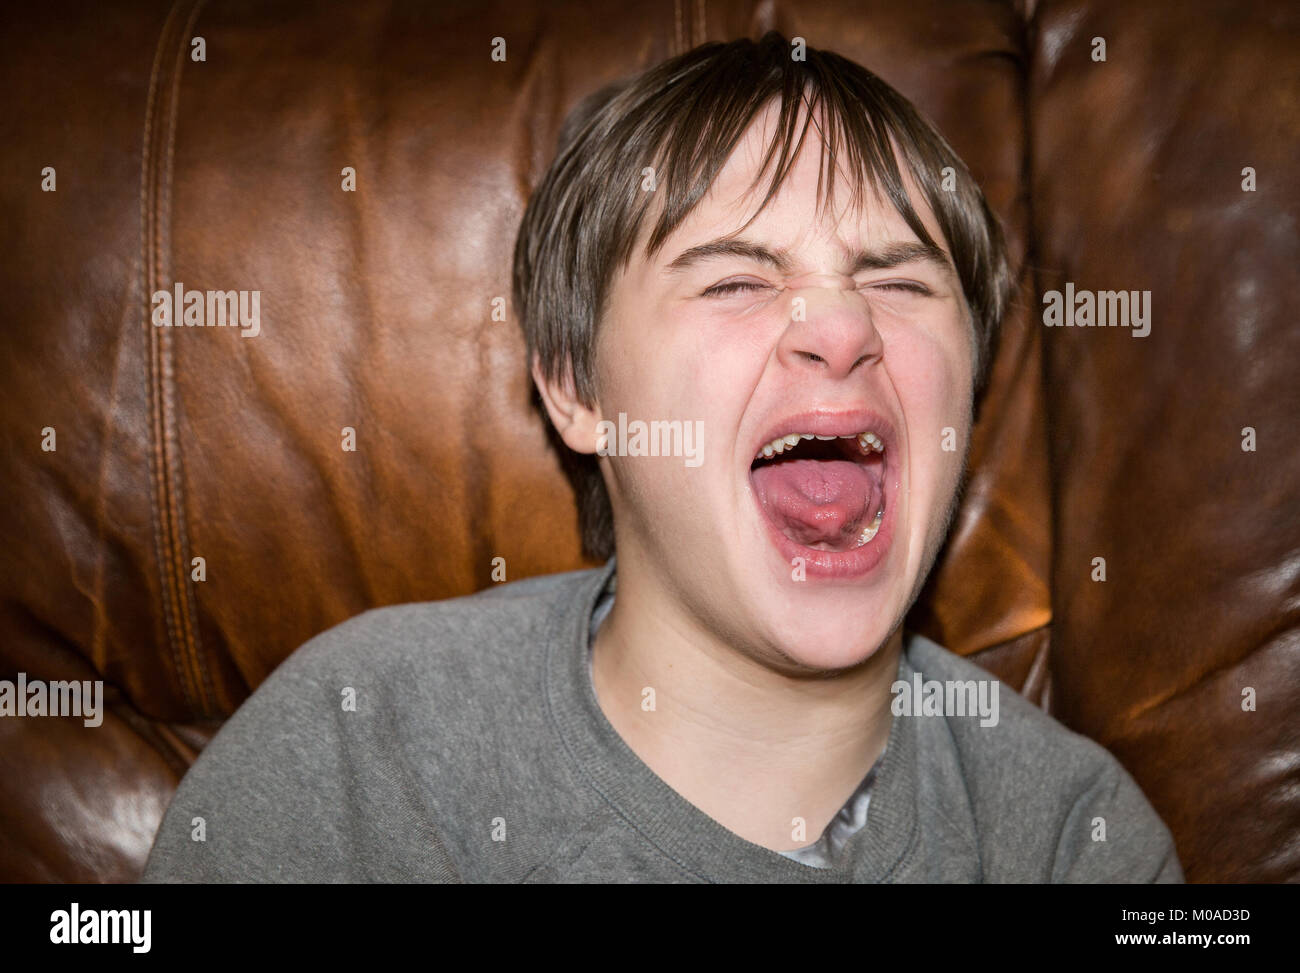 Teenage boy with Autism and Down's Syndrome has a meltdown Stock Photo